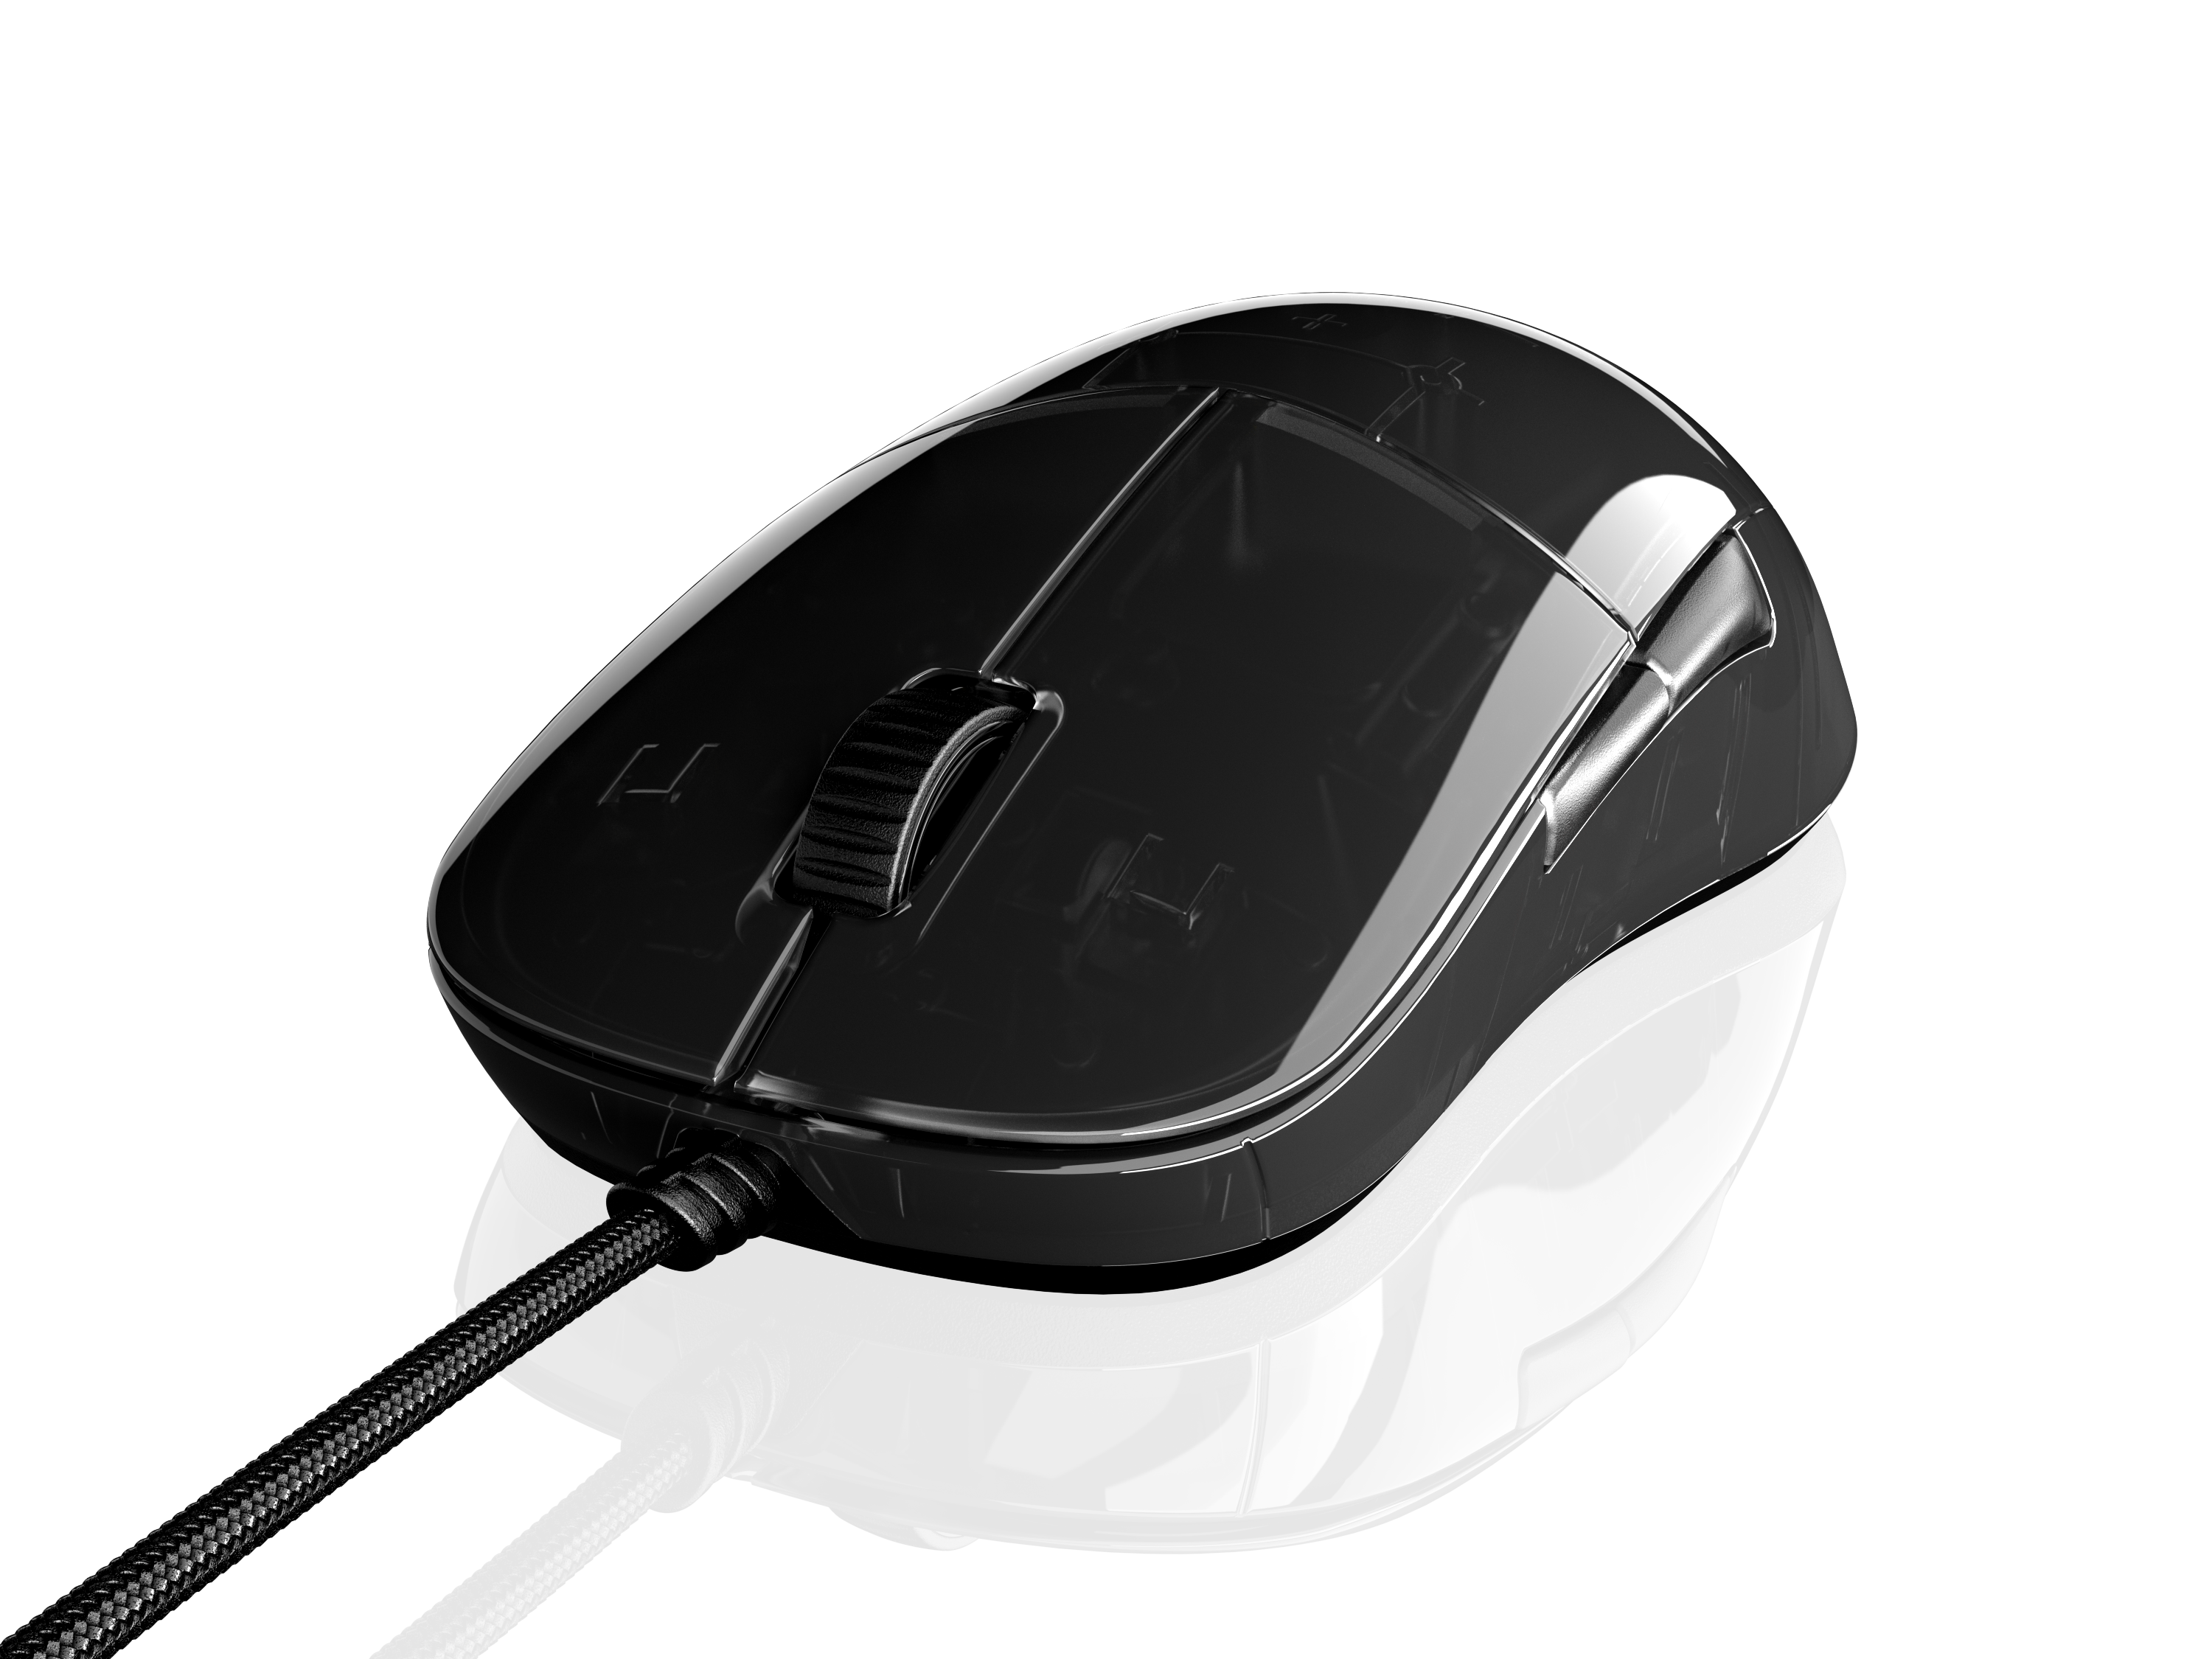 Built for Tournament Performance XM1r Gaming Mouse